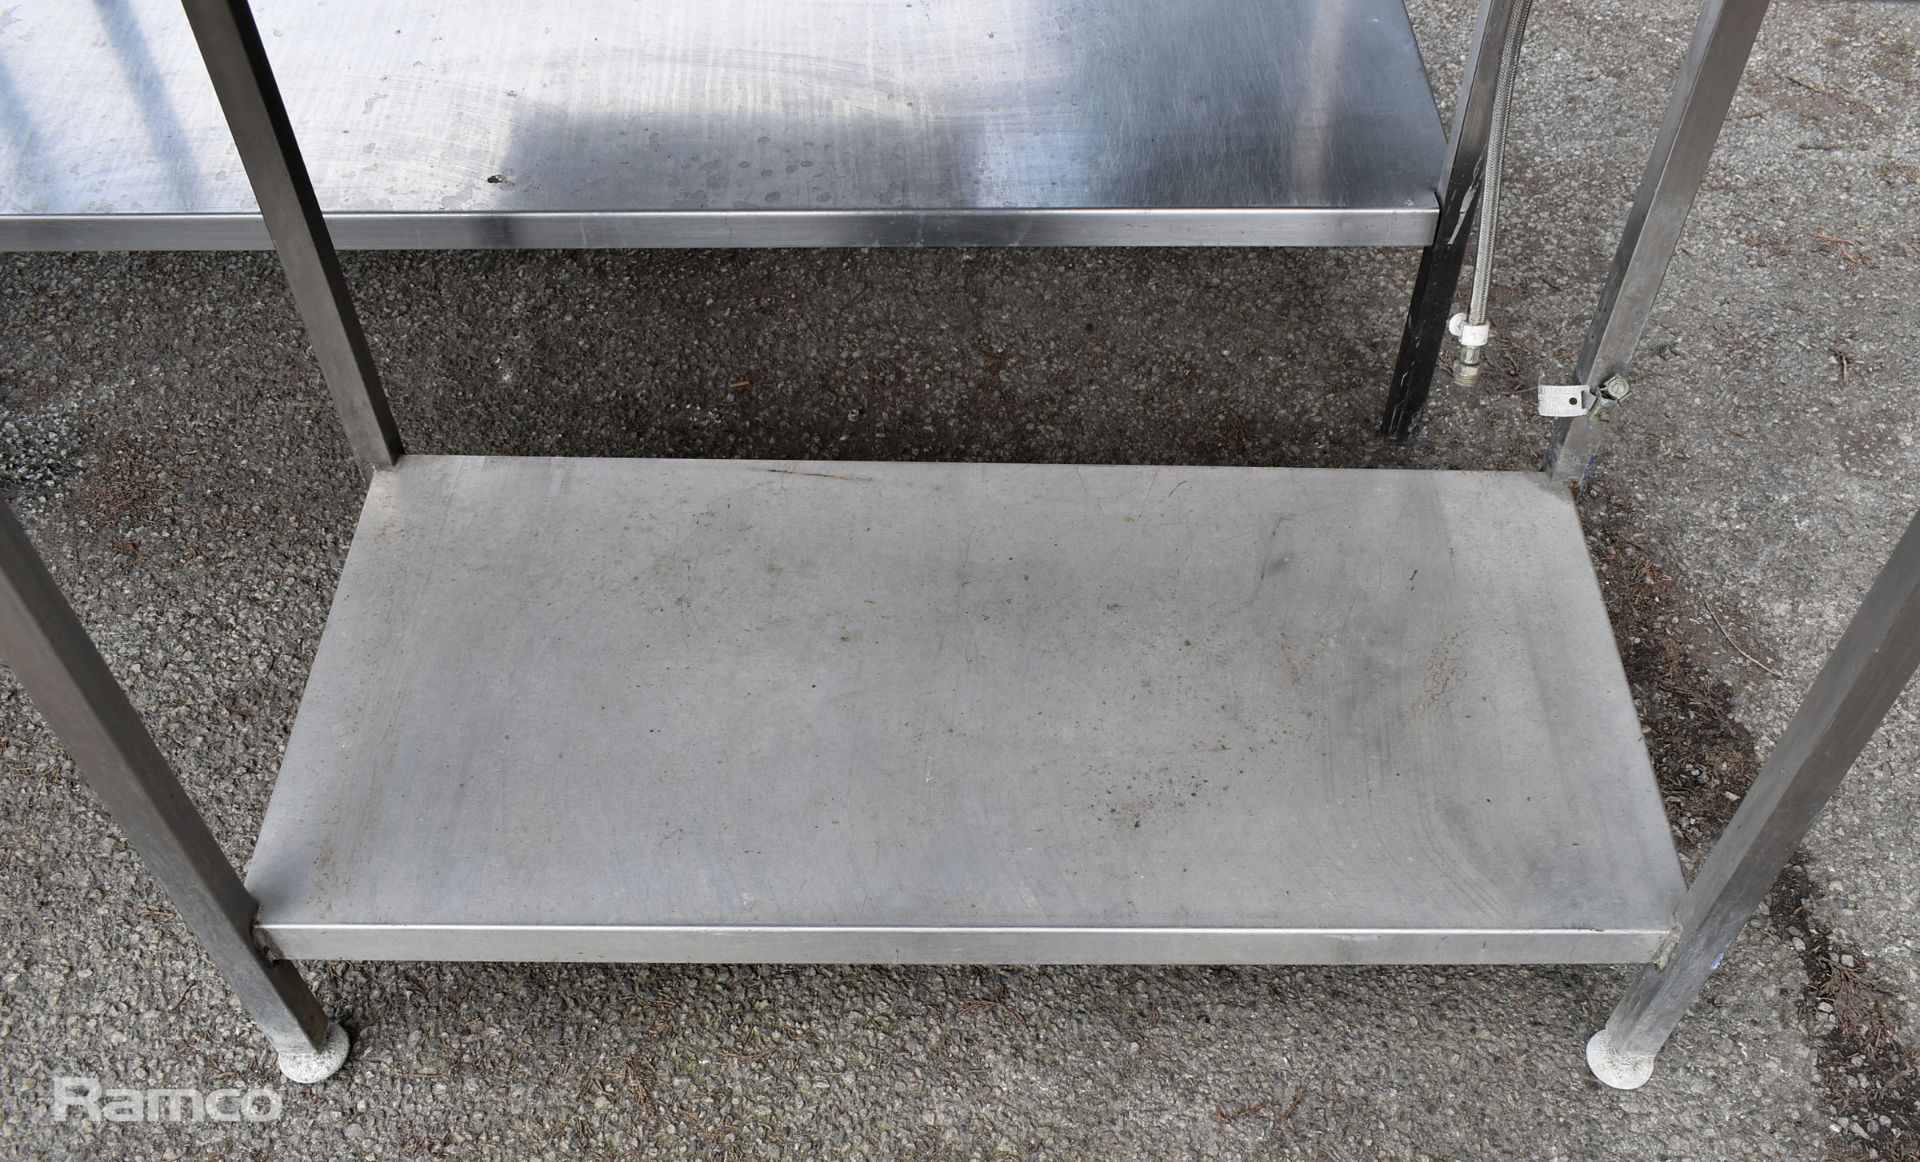 Stainless steel table with handwash sink - W 1750 x D 660 x H 900mm - Image 2 of 4